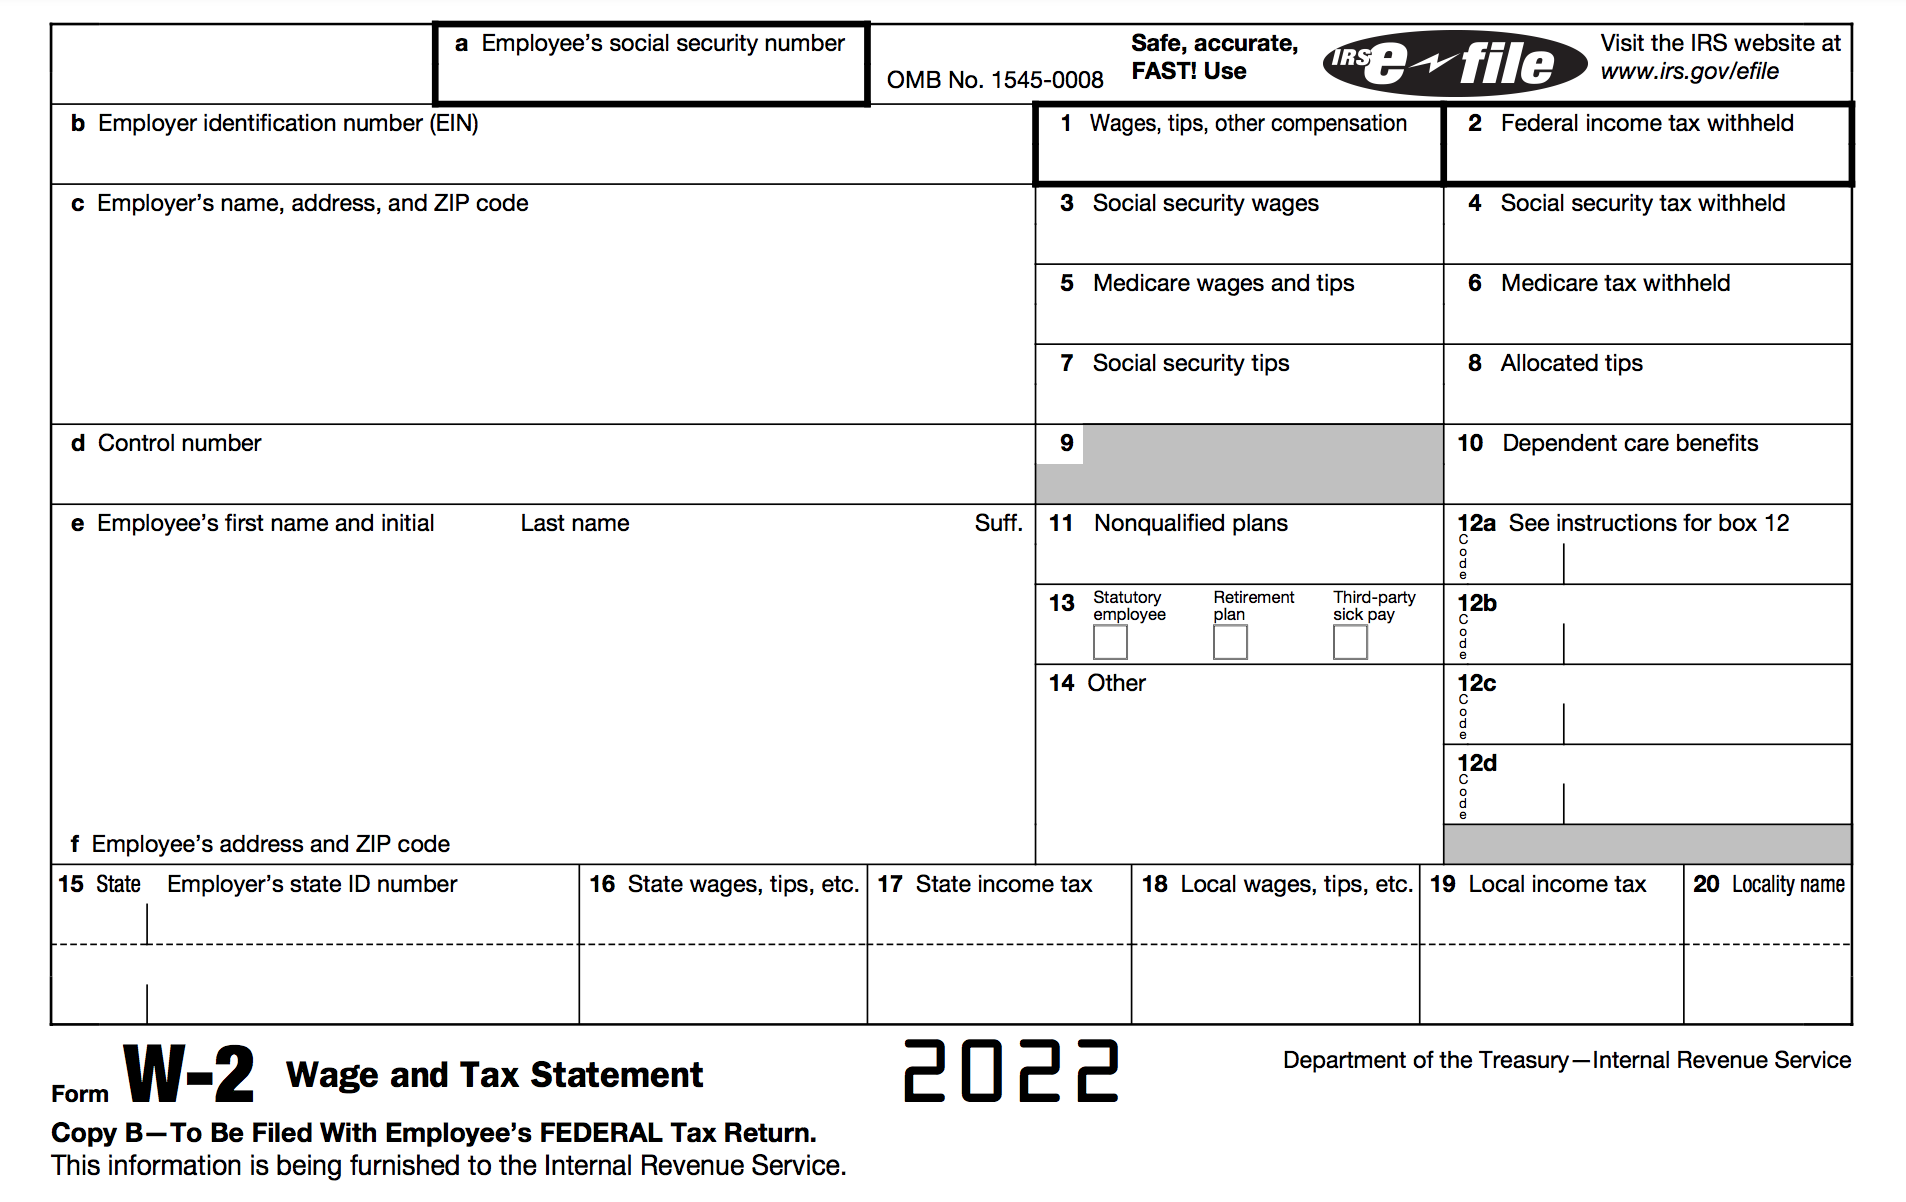 How To Fill Out A W-2 Tax Form | Smartasset for W2 Form Fill Out